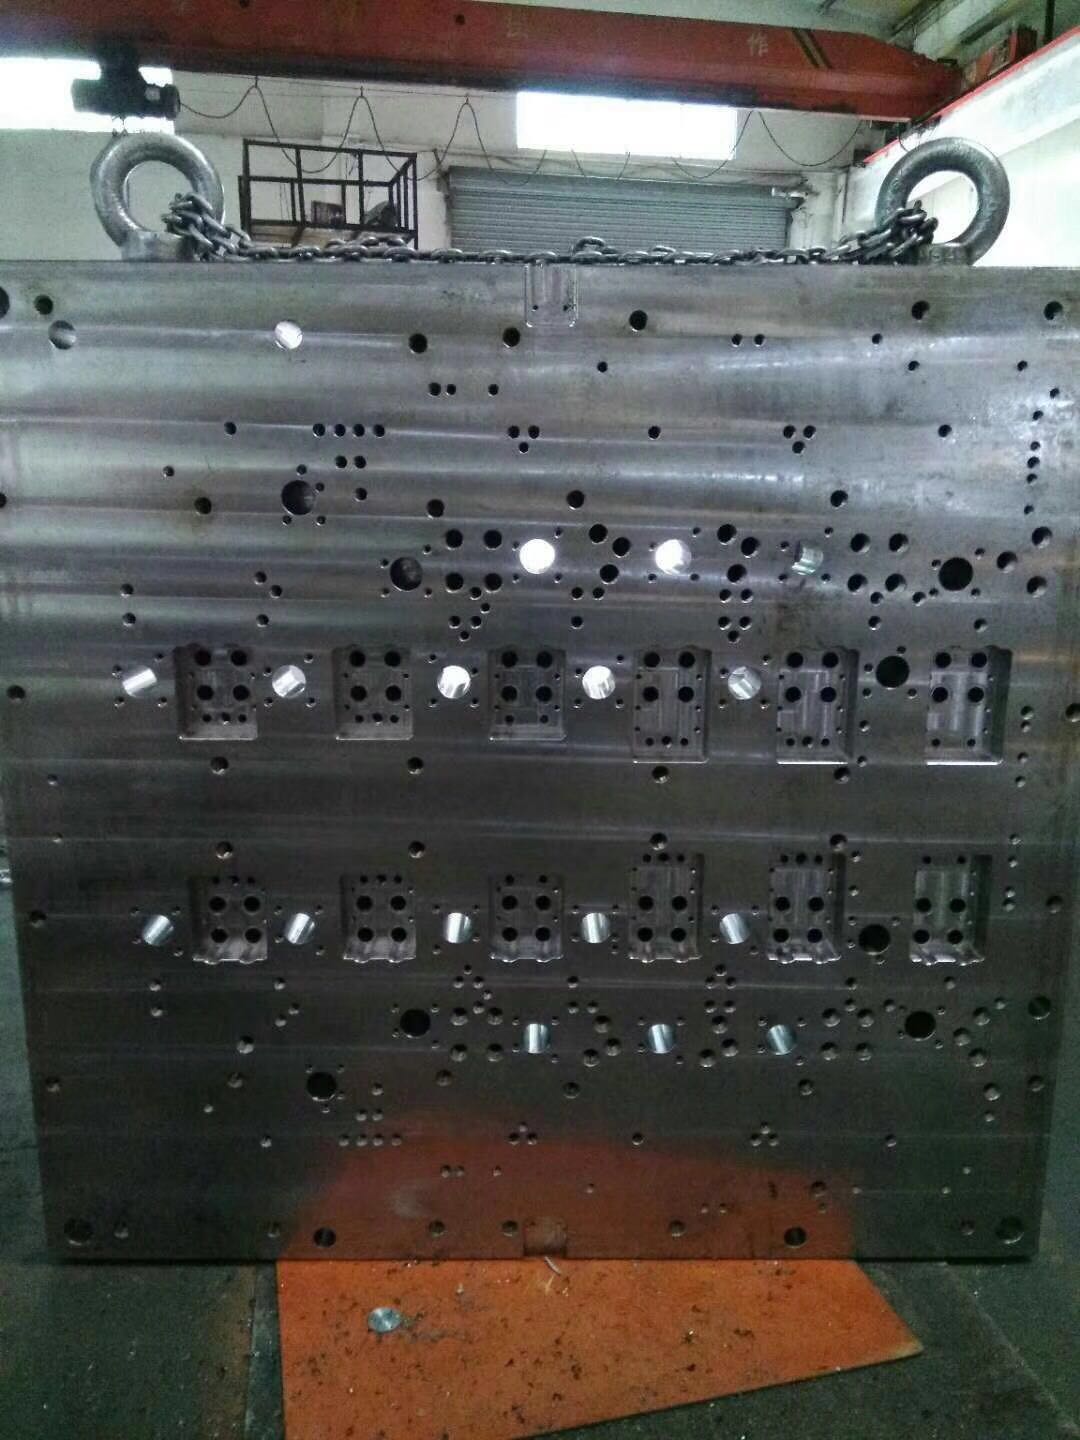 As a plastic mold manufacturers china,what types of tests should be conducted on molds before releasing them to customers?